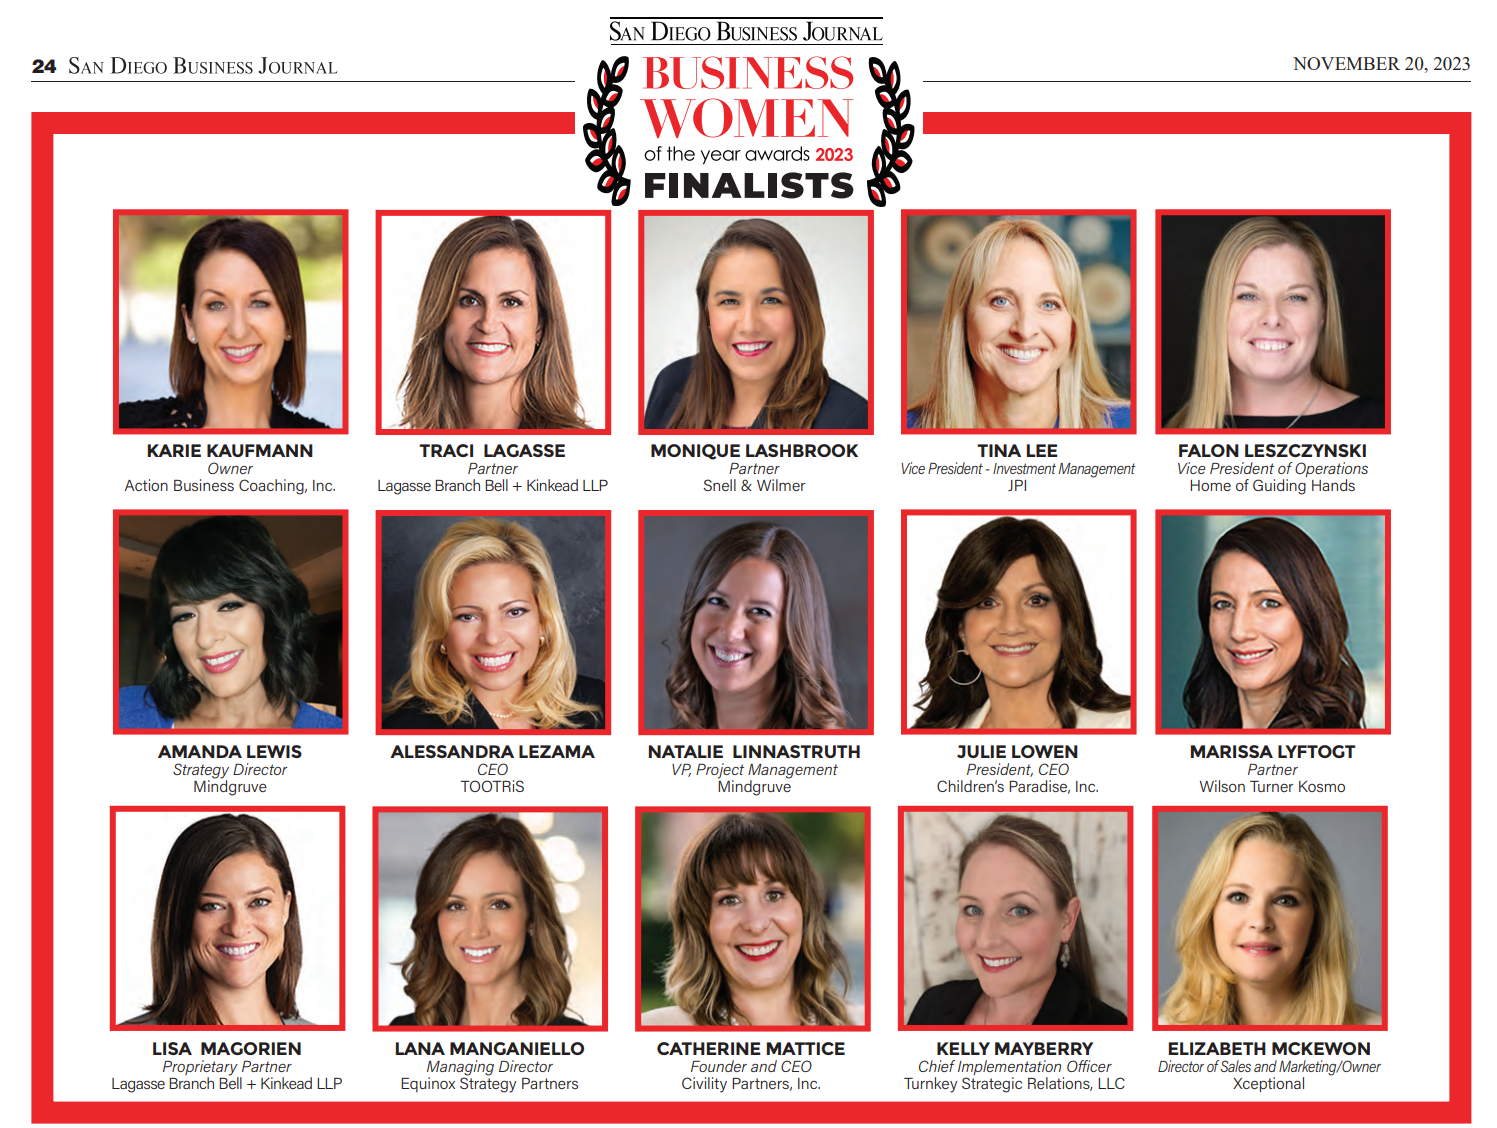 San Diego Business Journal's Business Women of the Year Awards 2023